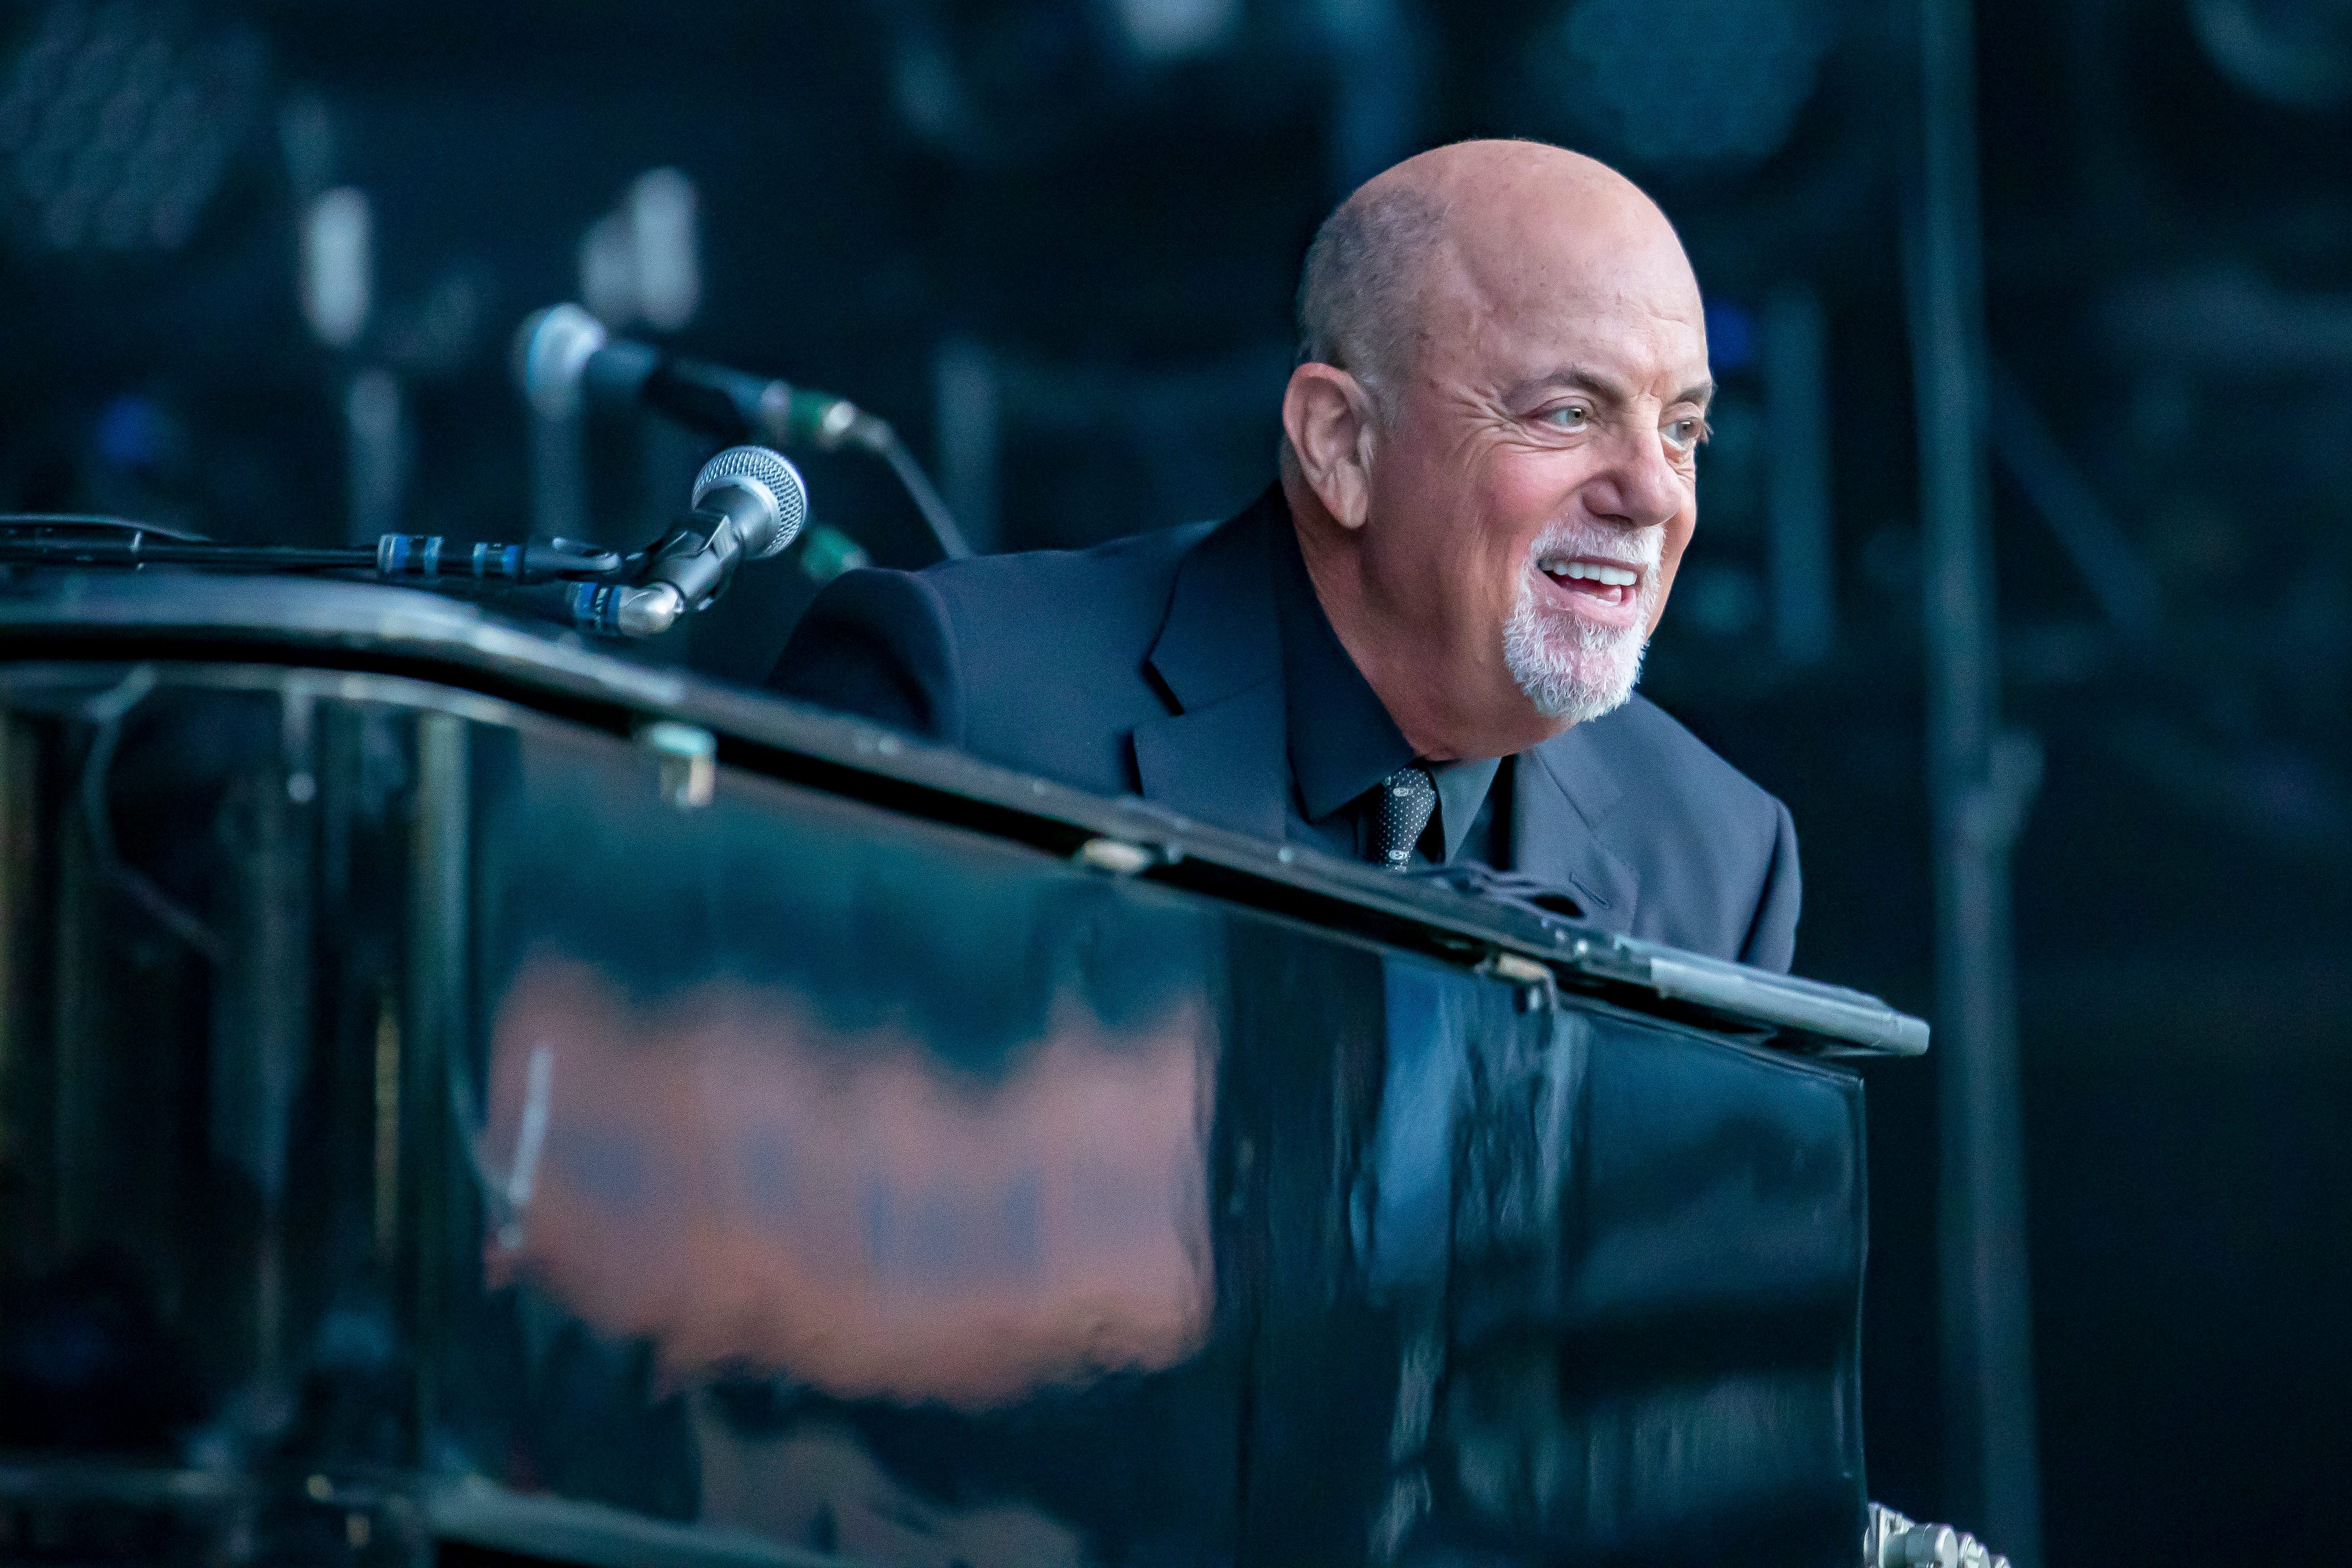 Billy Joel performs at Comerica Park on July 9, 2022 in Detroit, Michigan.